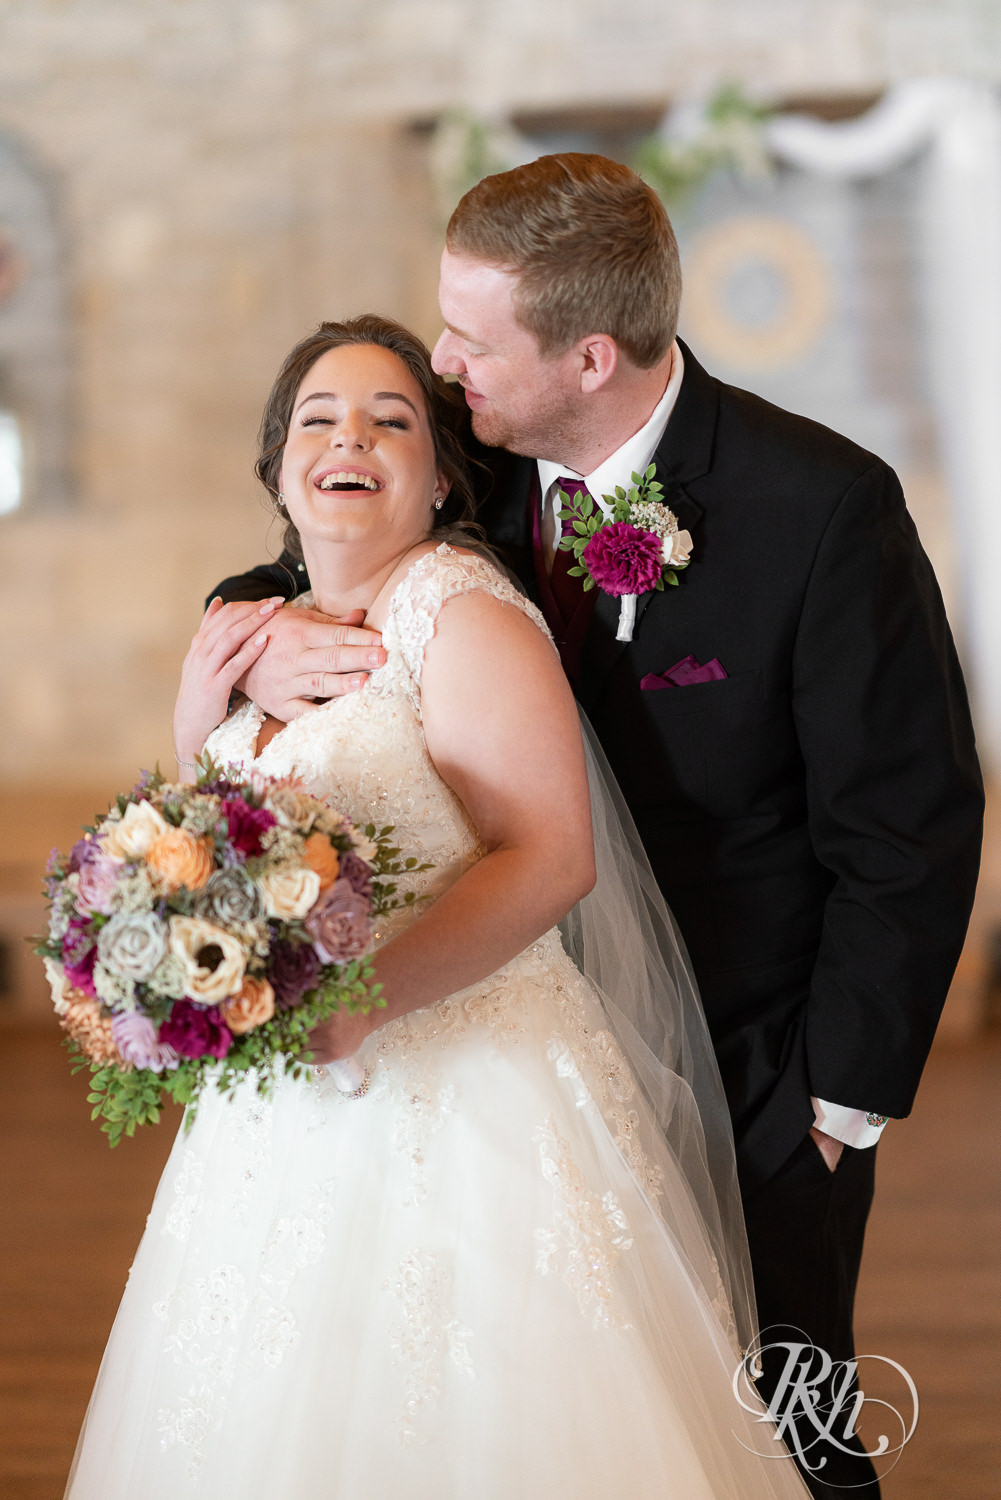 Bride and groom smiling at each other at Glenhaven Events in Farmington, Minnesota.